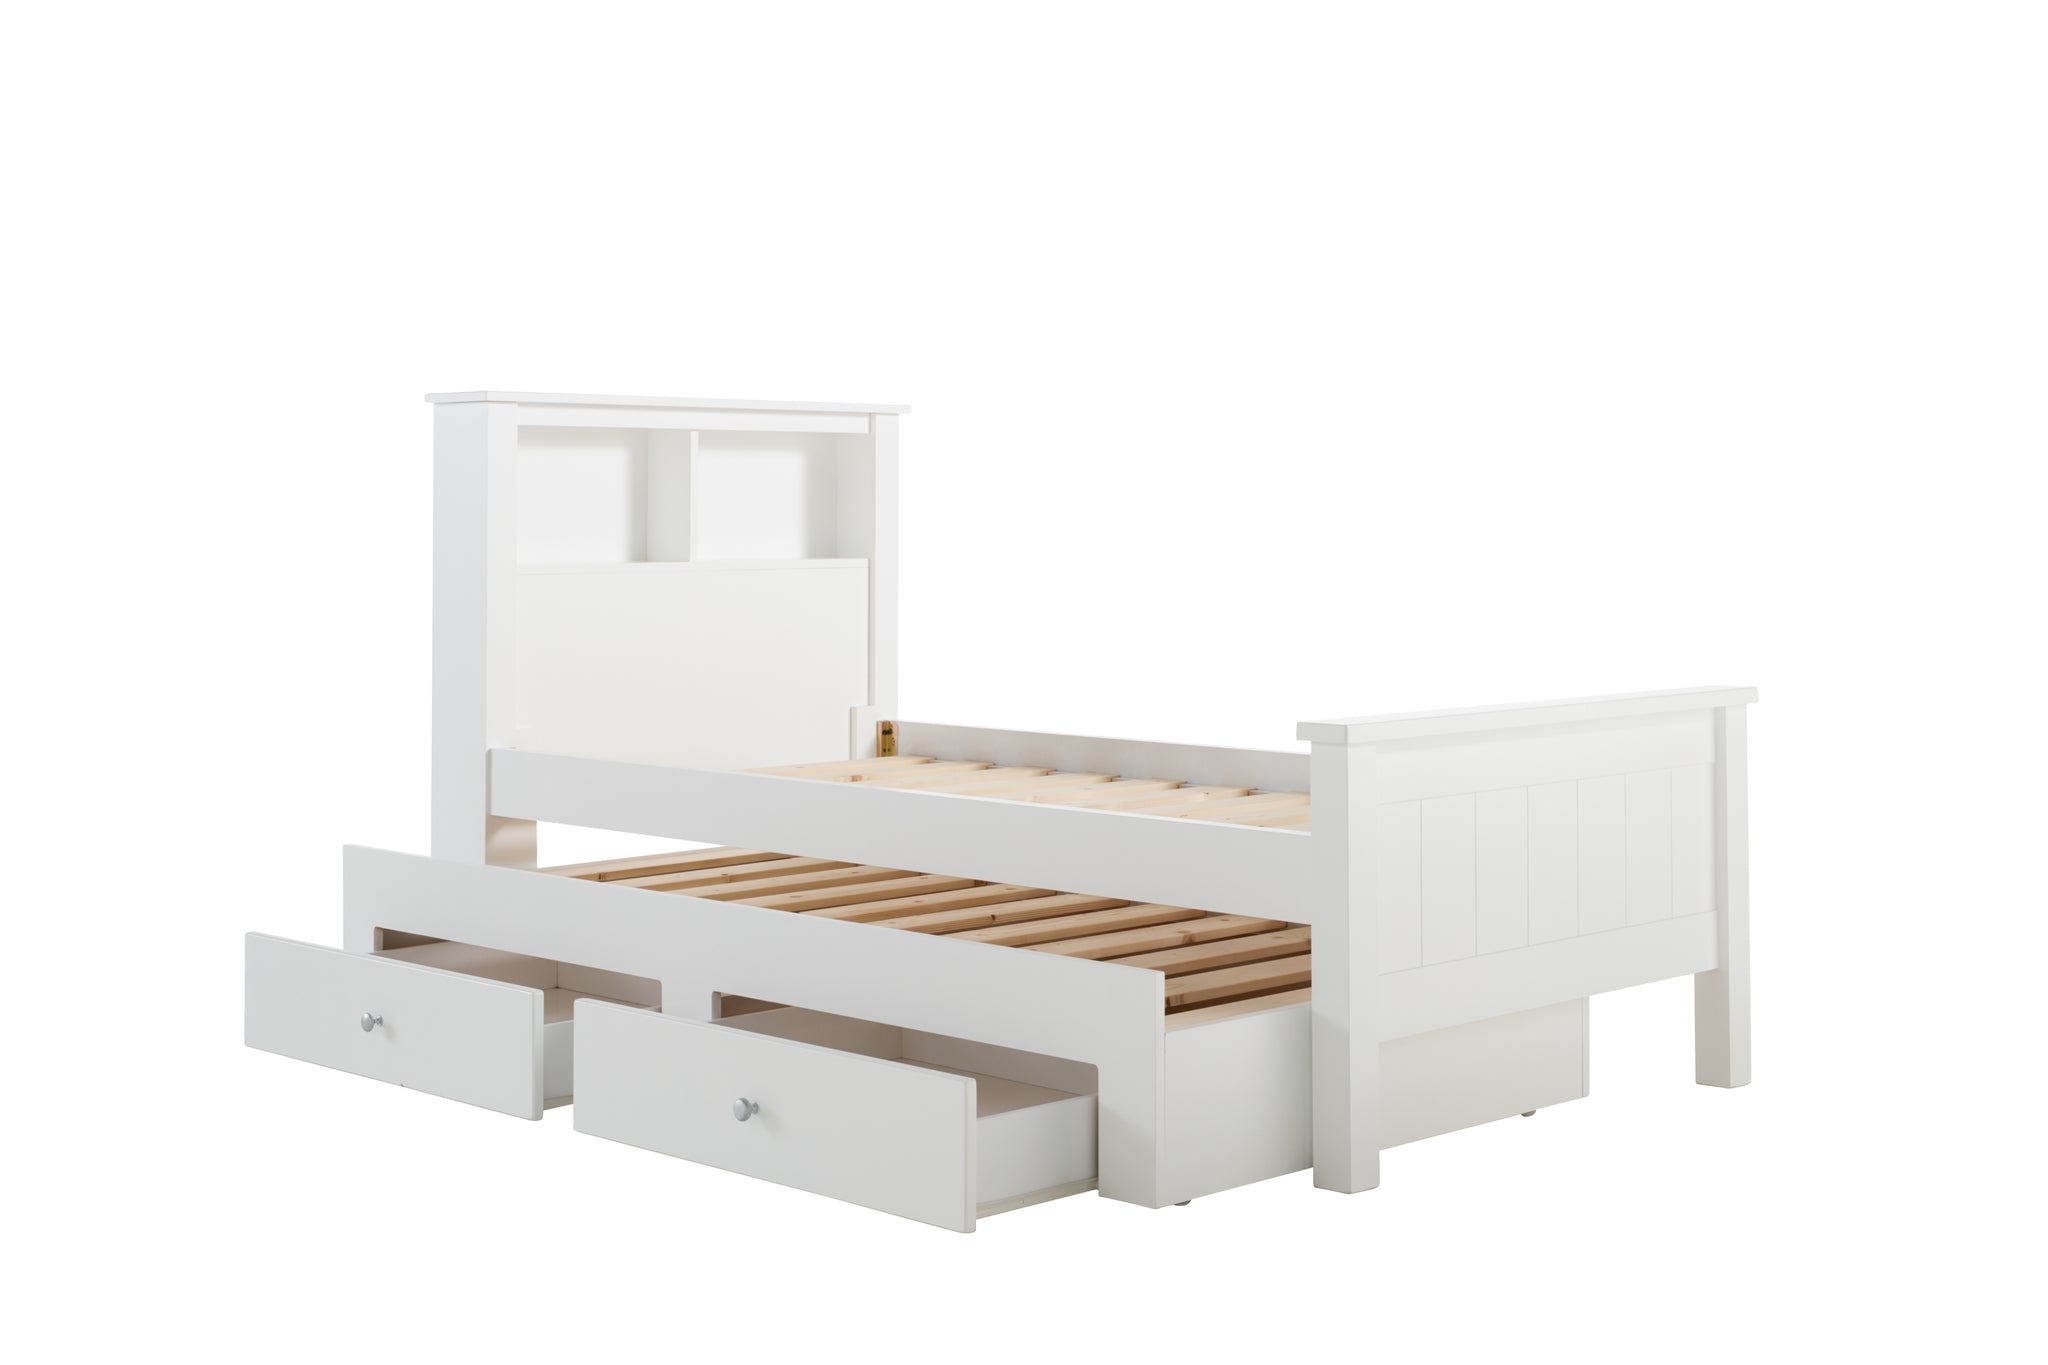 king single bed frame with drawers